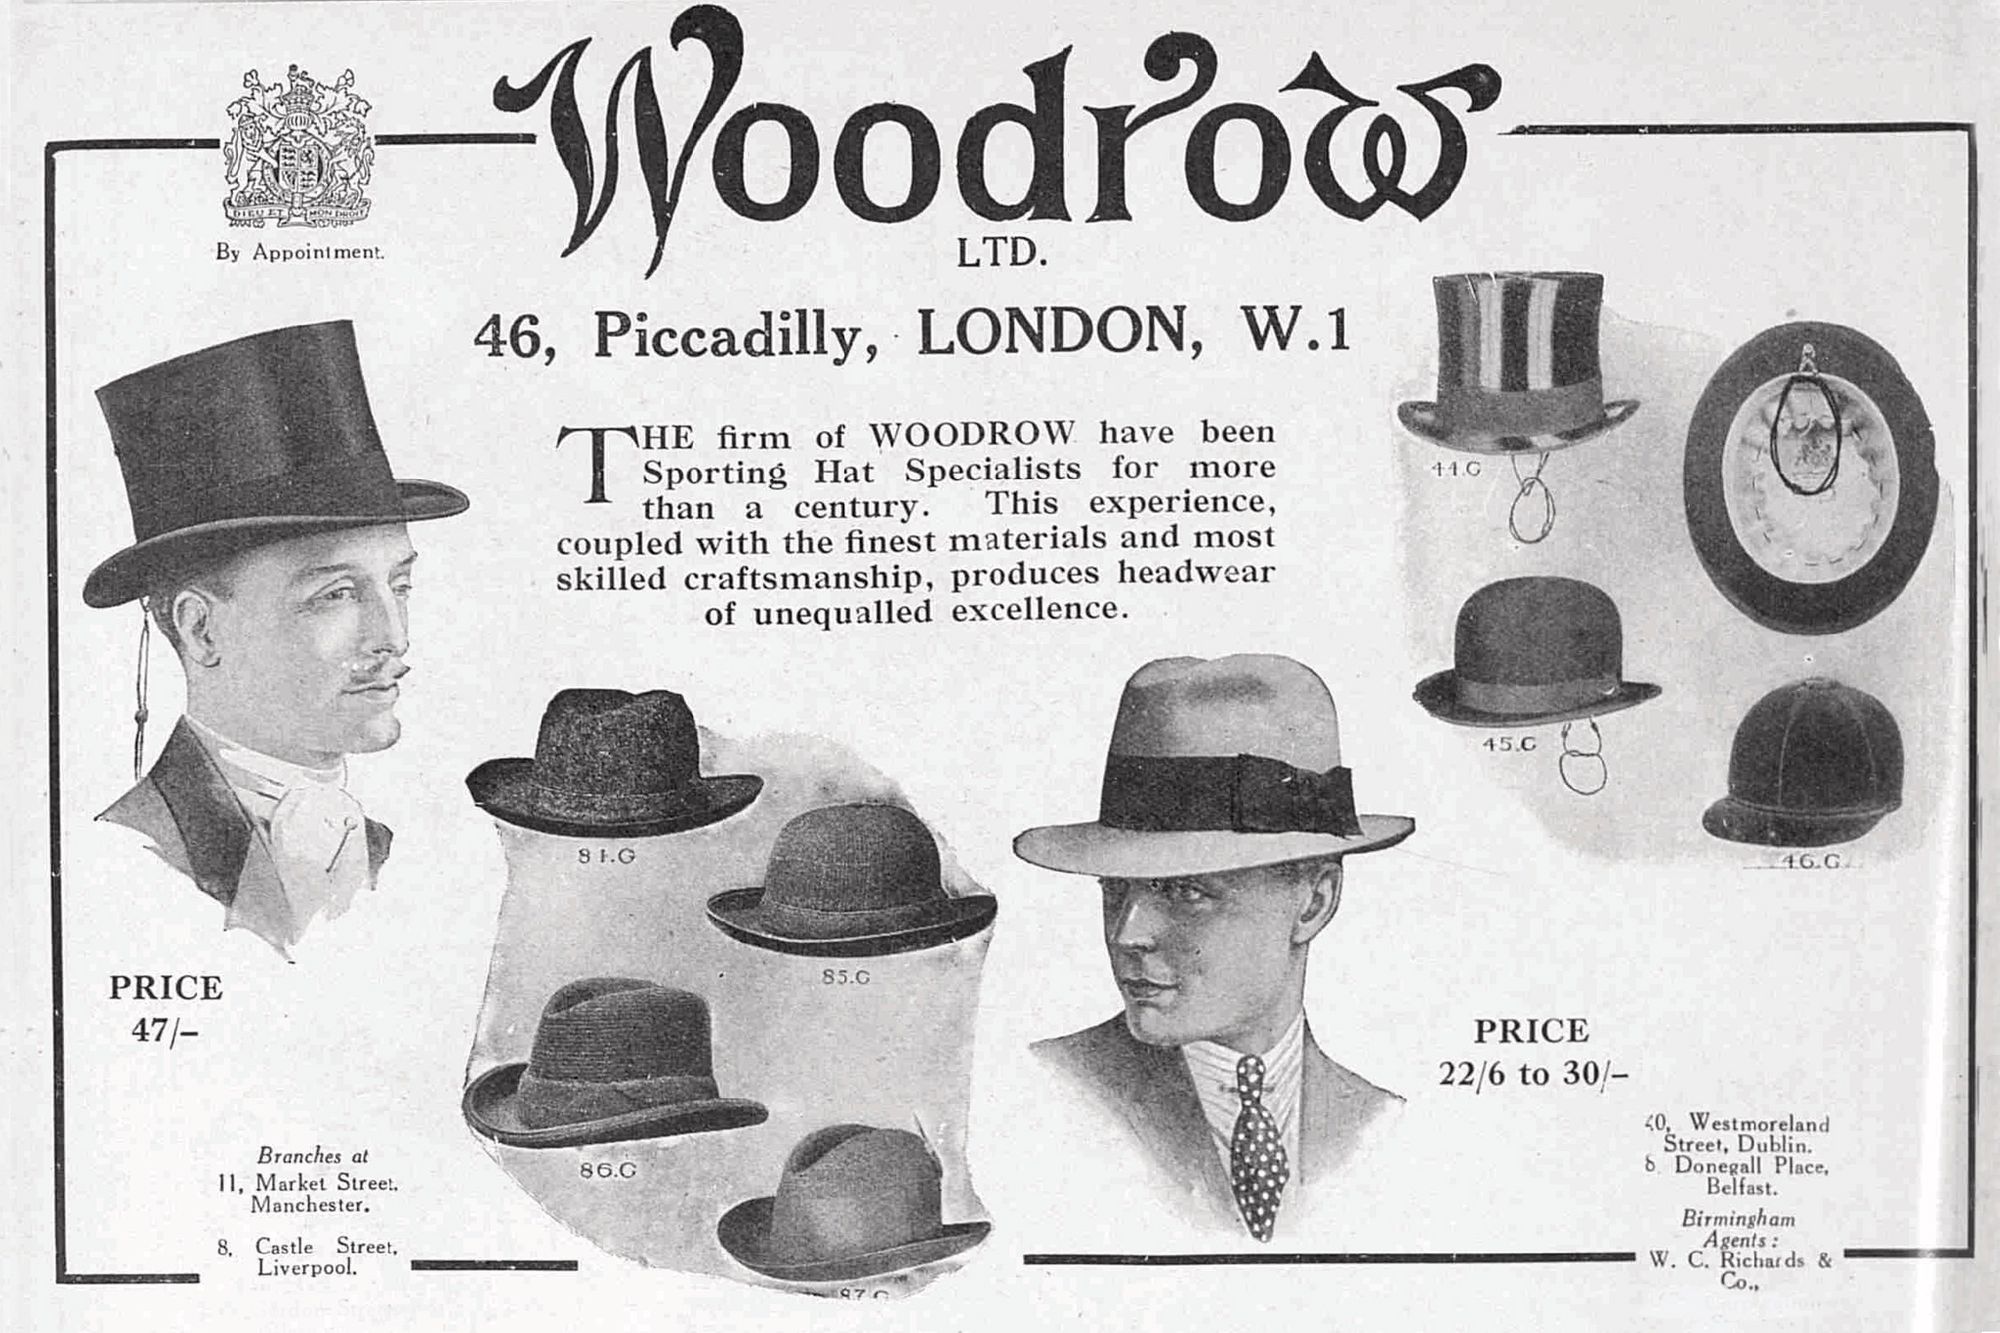 Ad for Woodrow Ltd Source: The Bystander Magazine